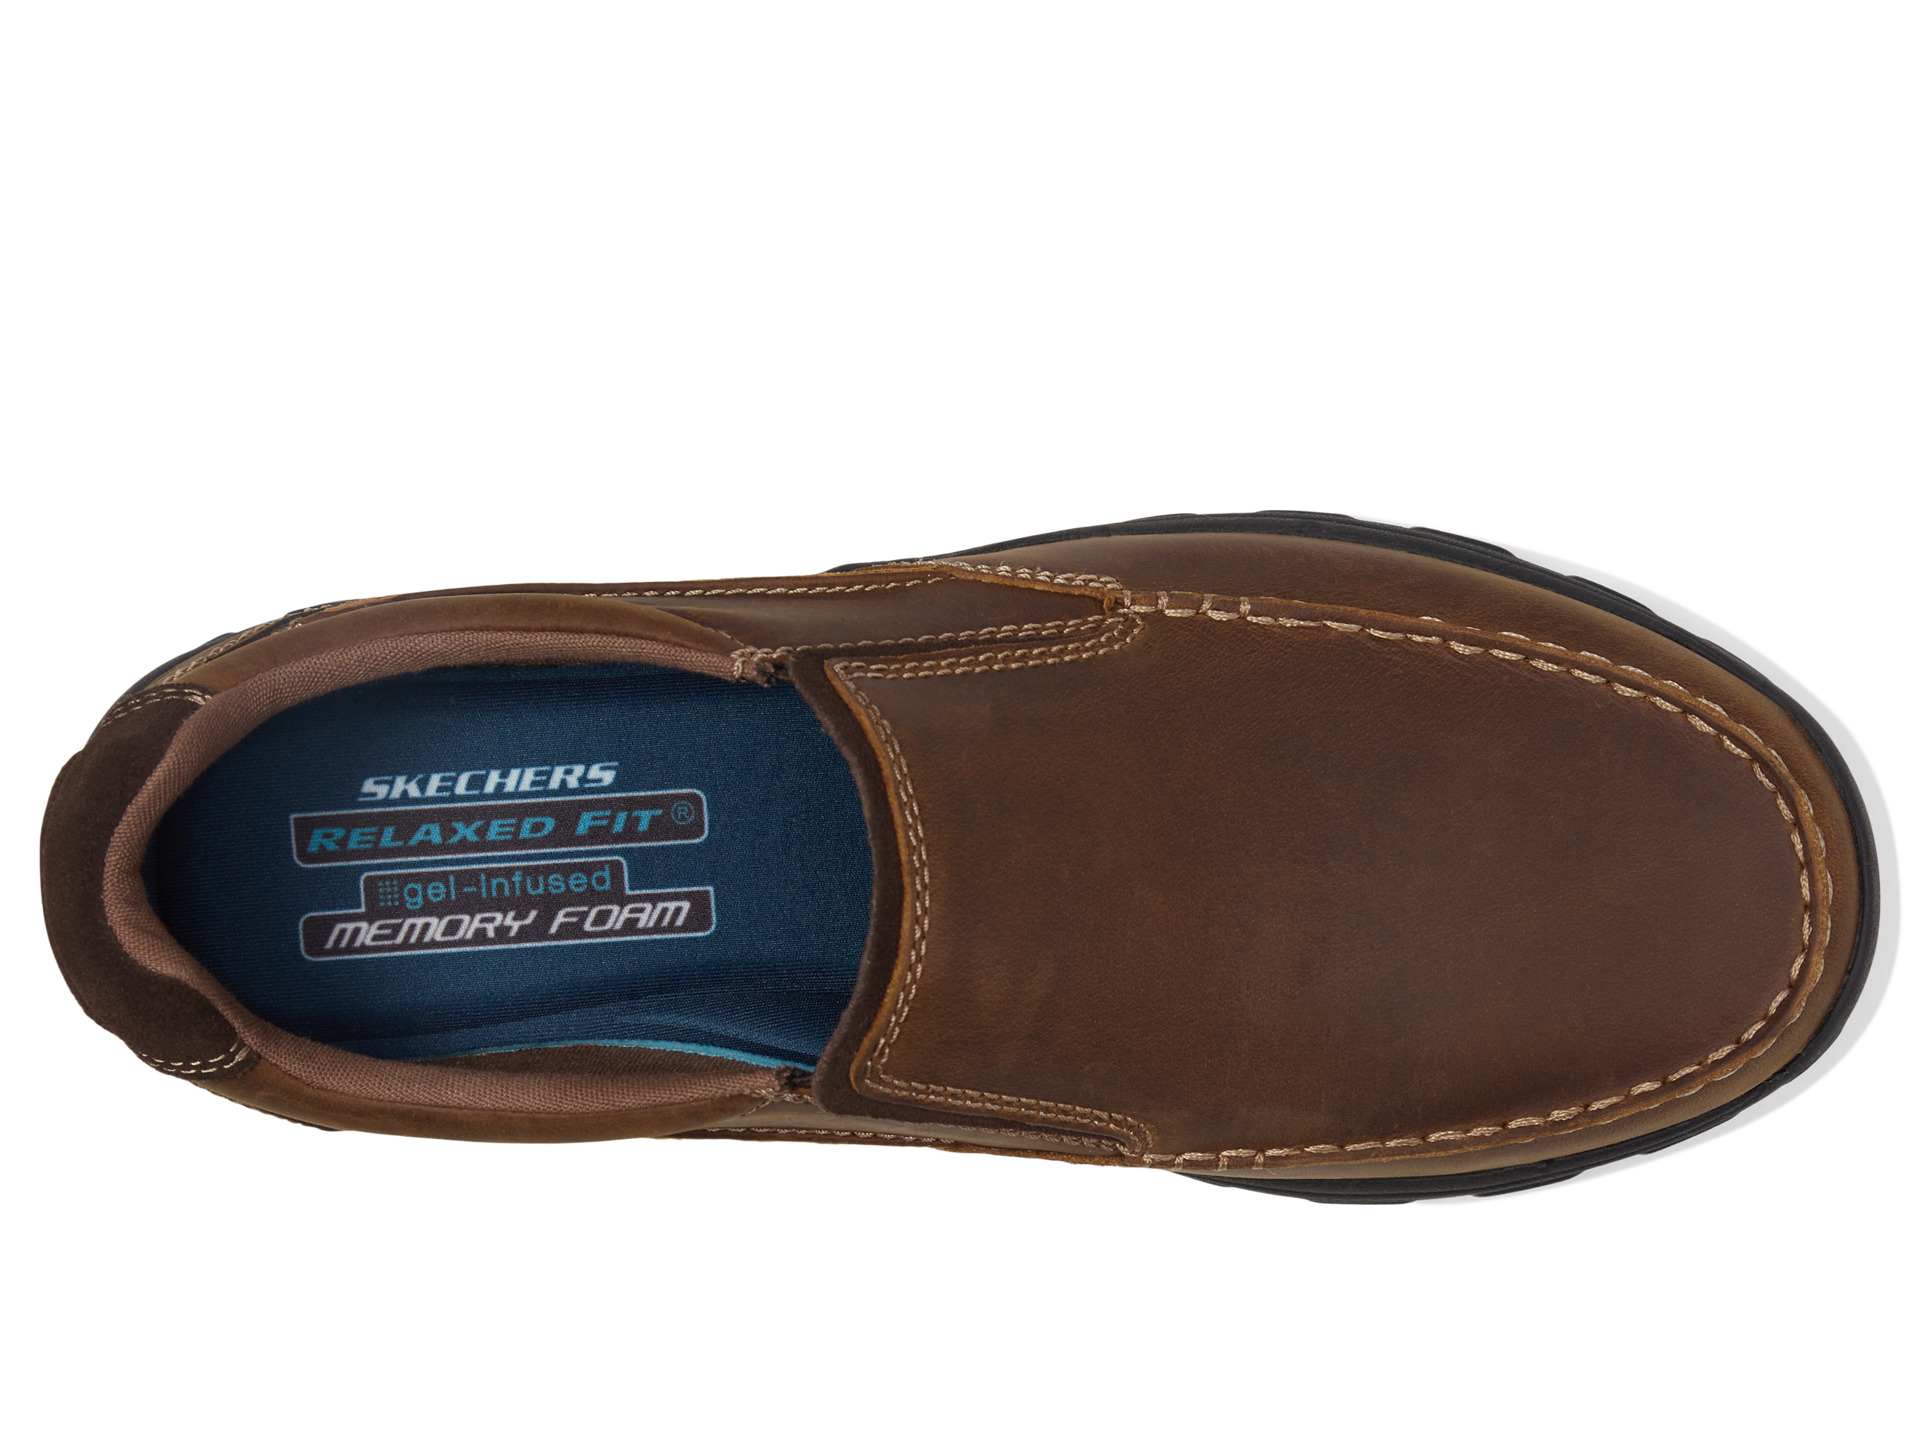 skechers relaxed fit shoes review